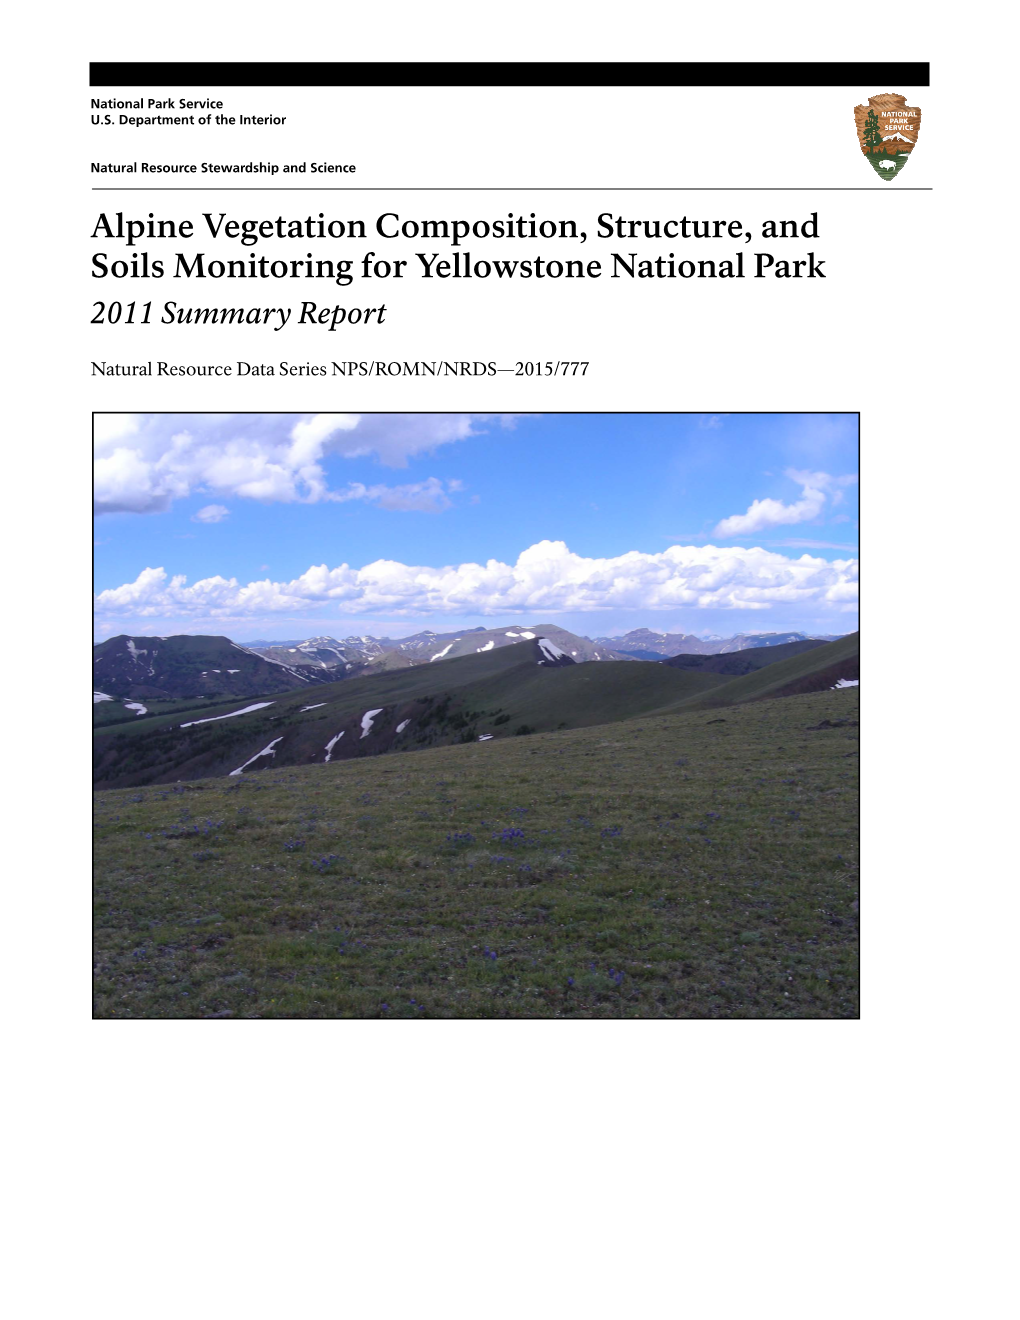 Alpine Vegetation Composition, Structure, and Soils Monitoring for Yellowstone National Park 2011 Summary Report